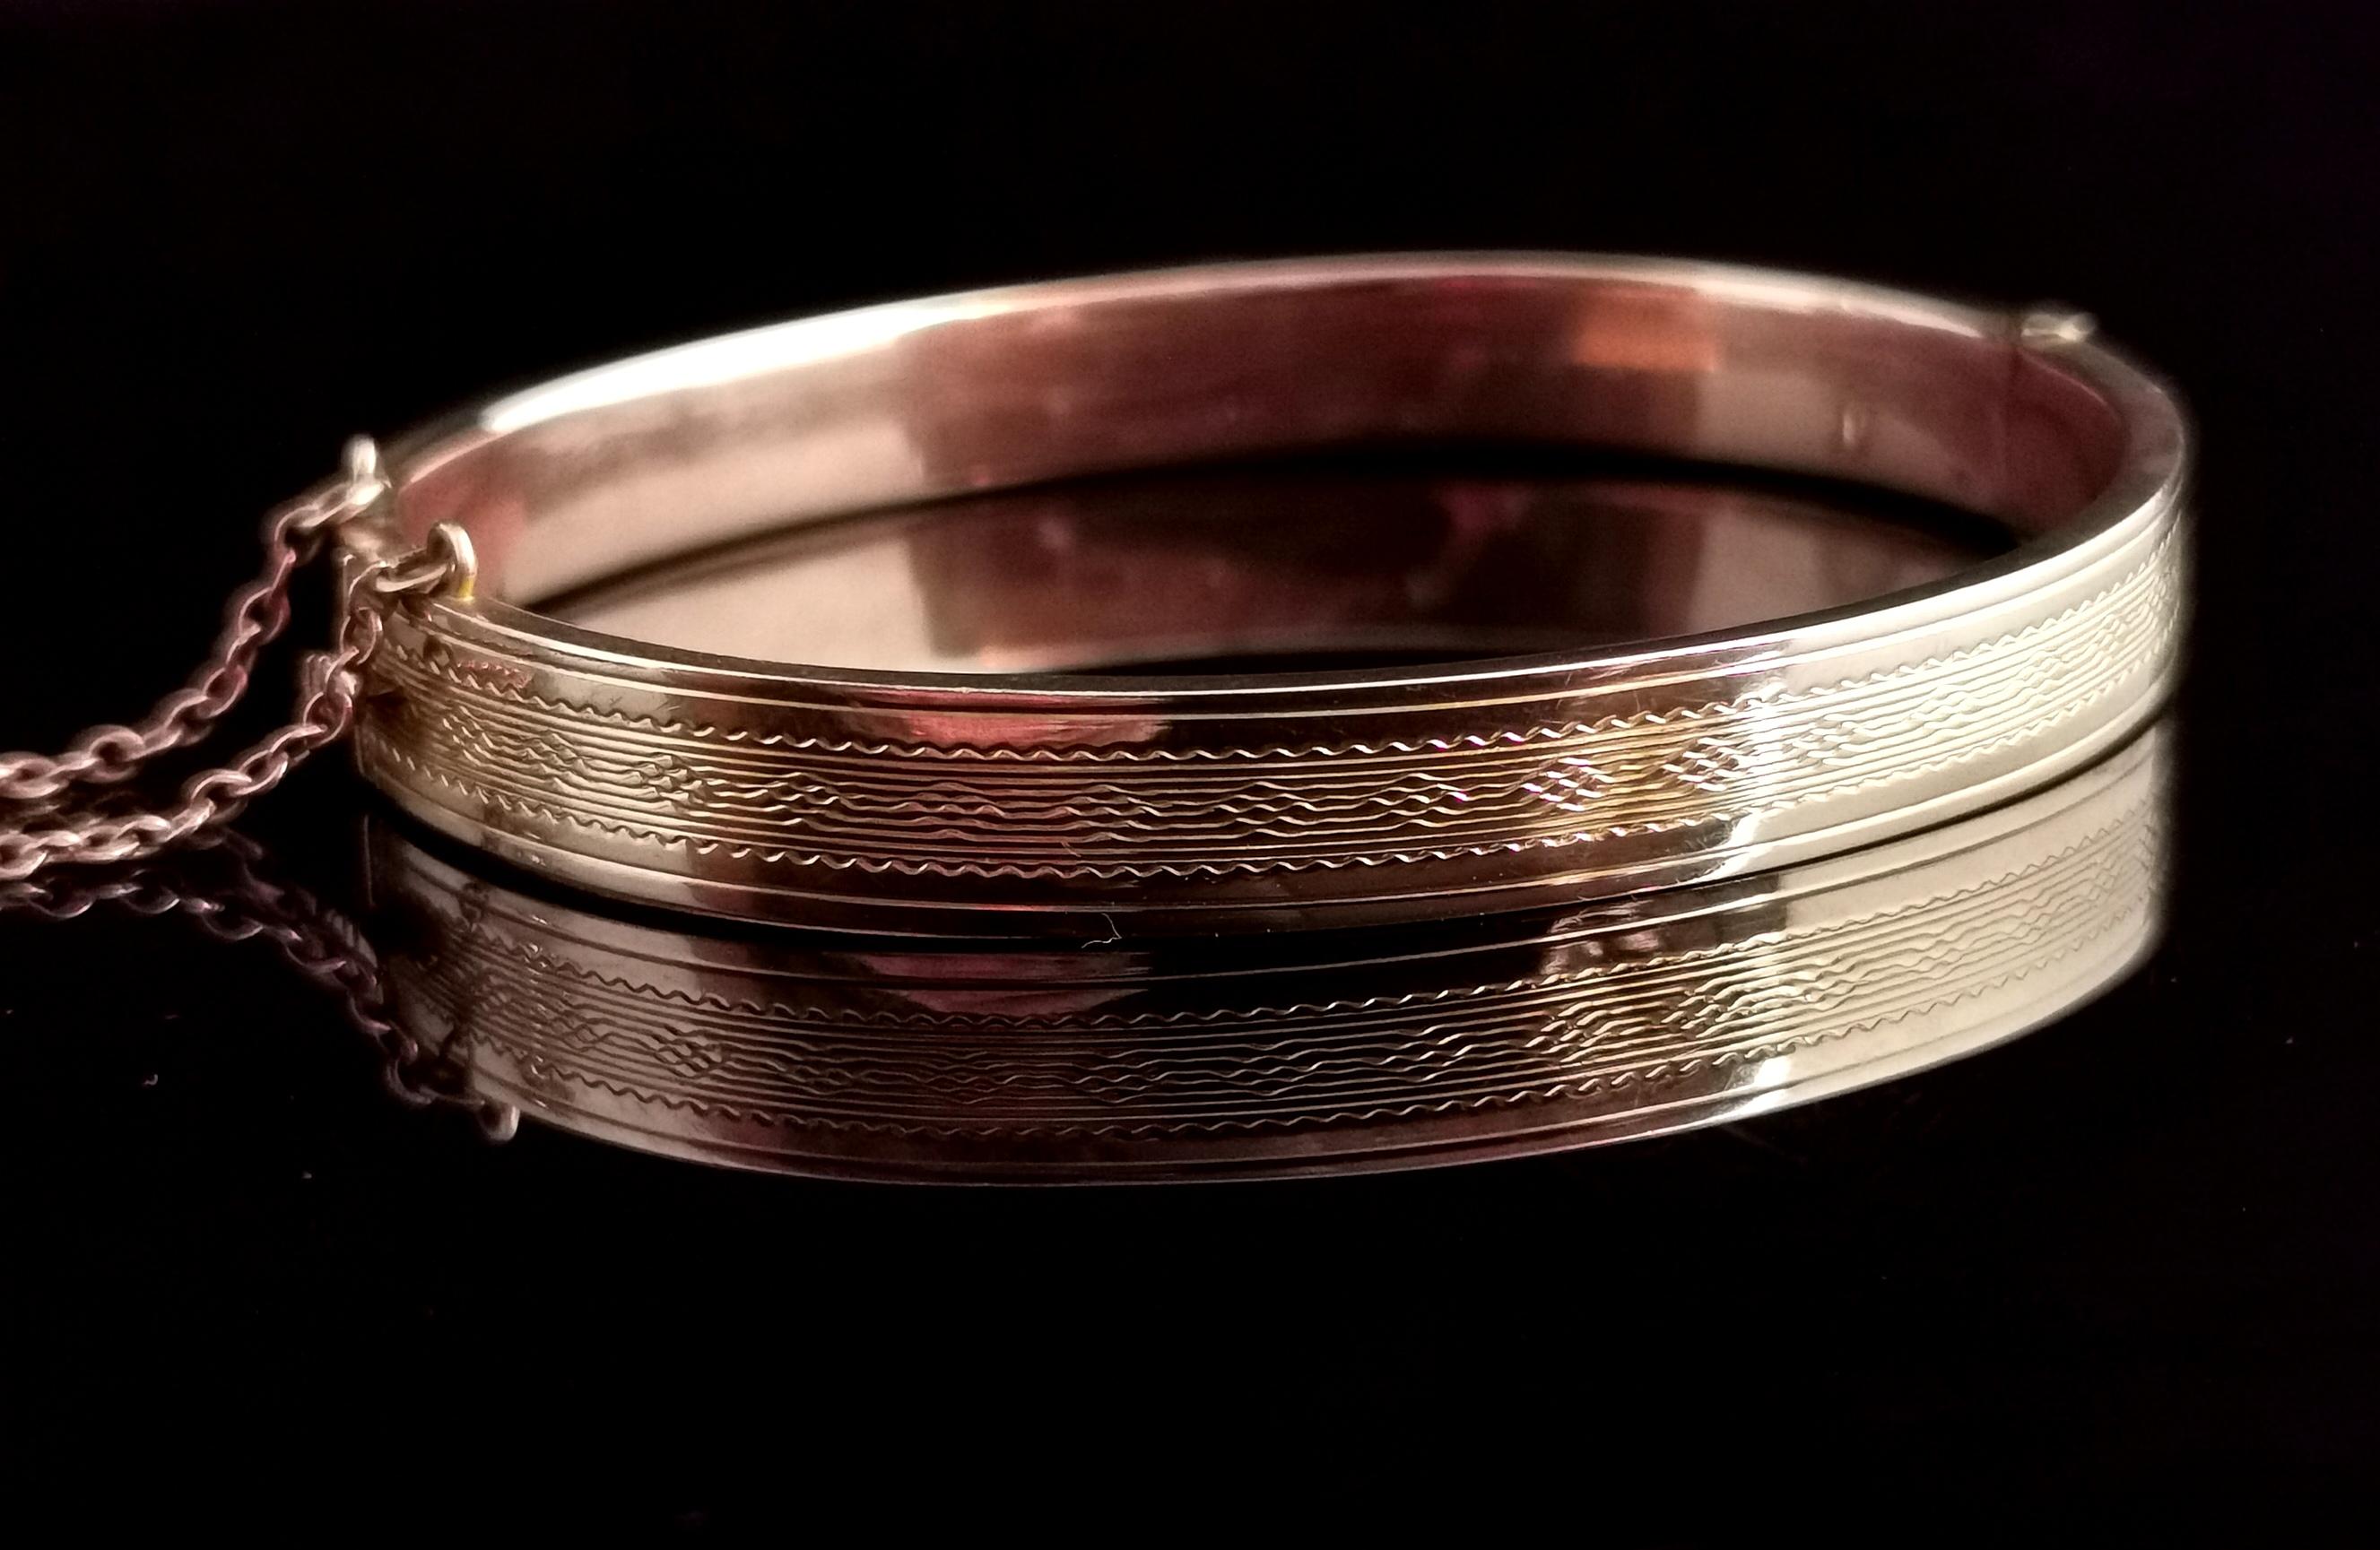 A beautiful vintage Art Deco era 9kt Rose gold bangle.

It has an attractive engine turned half design with slight yellow gold highlights within the engraving.

The reverse of the bangle is a smooth polished finish and it has a push catch and safety